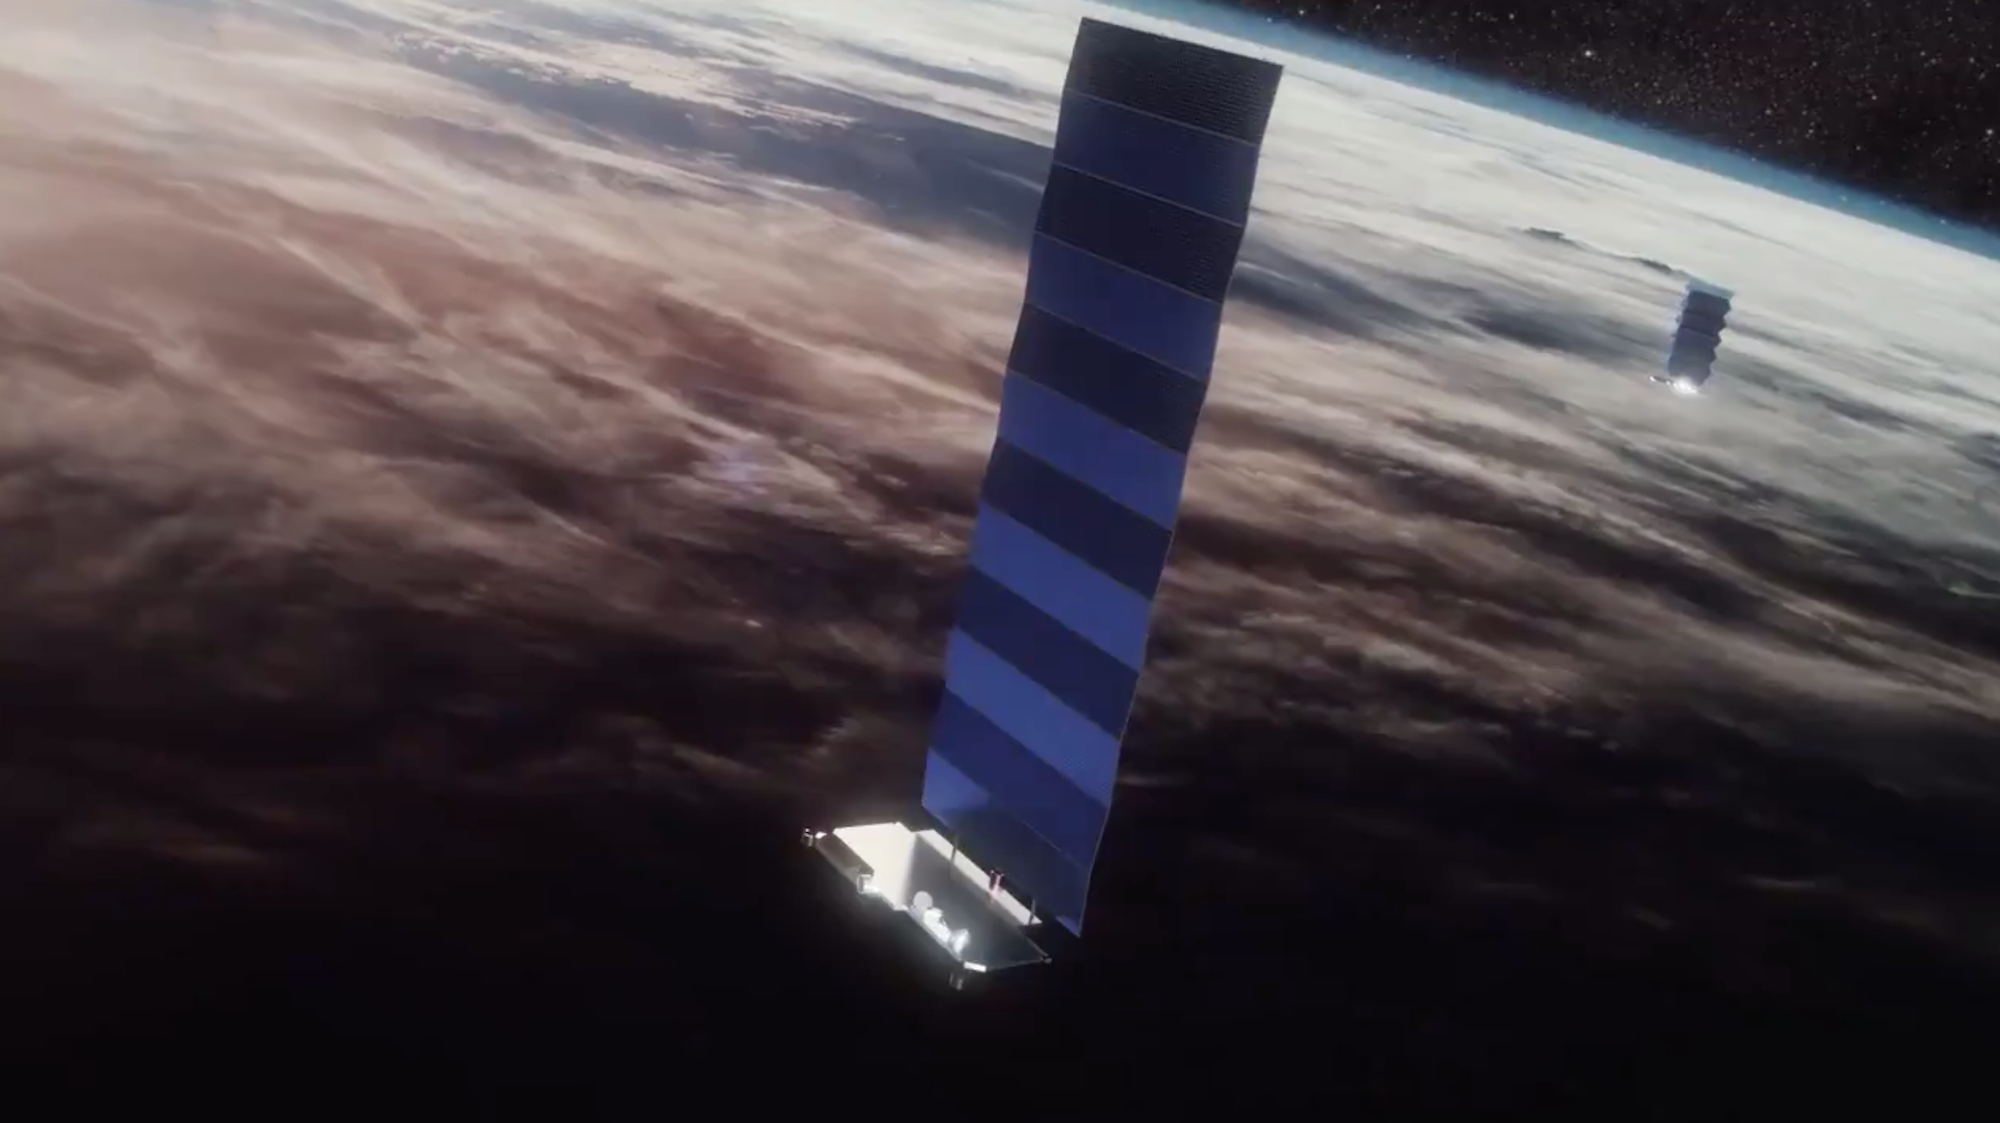 The Federal Communications Commission (FCC) grants permission for a polar launch of the Starlink satellites

